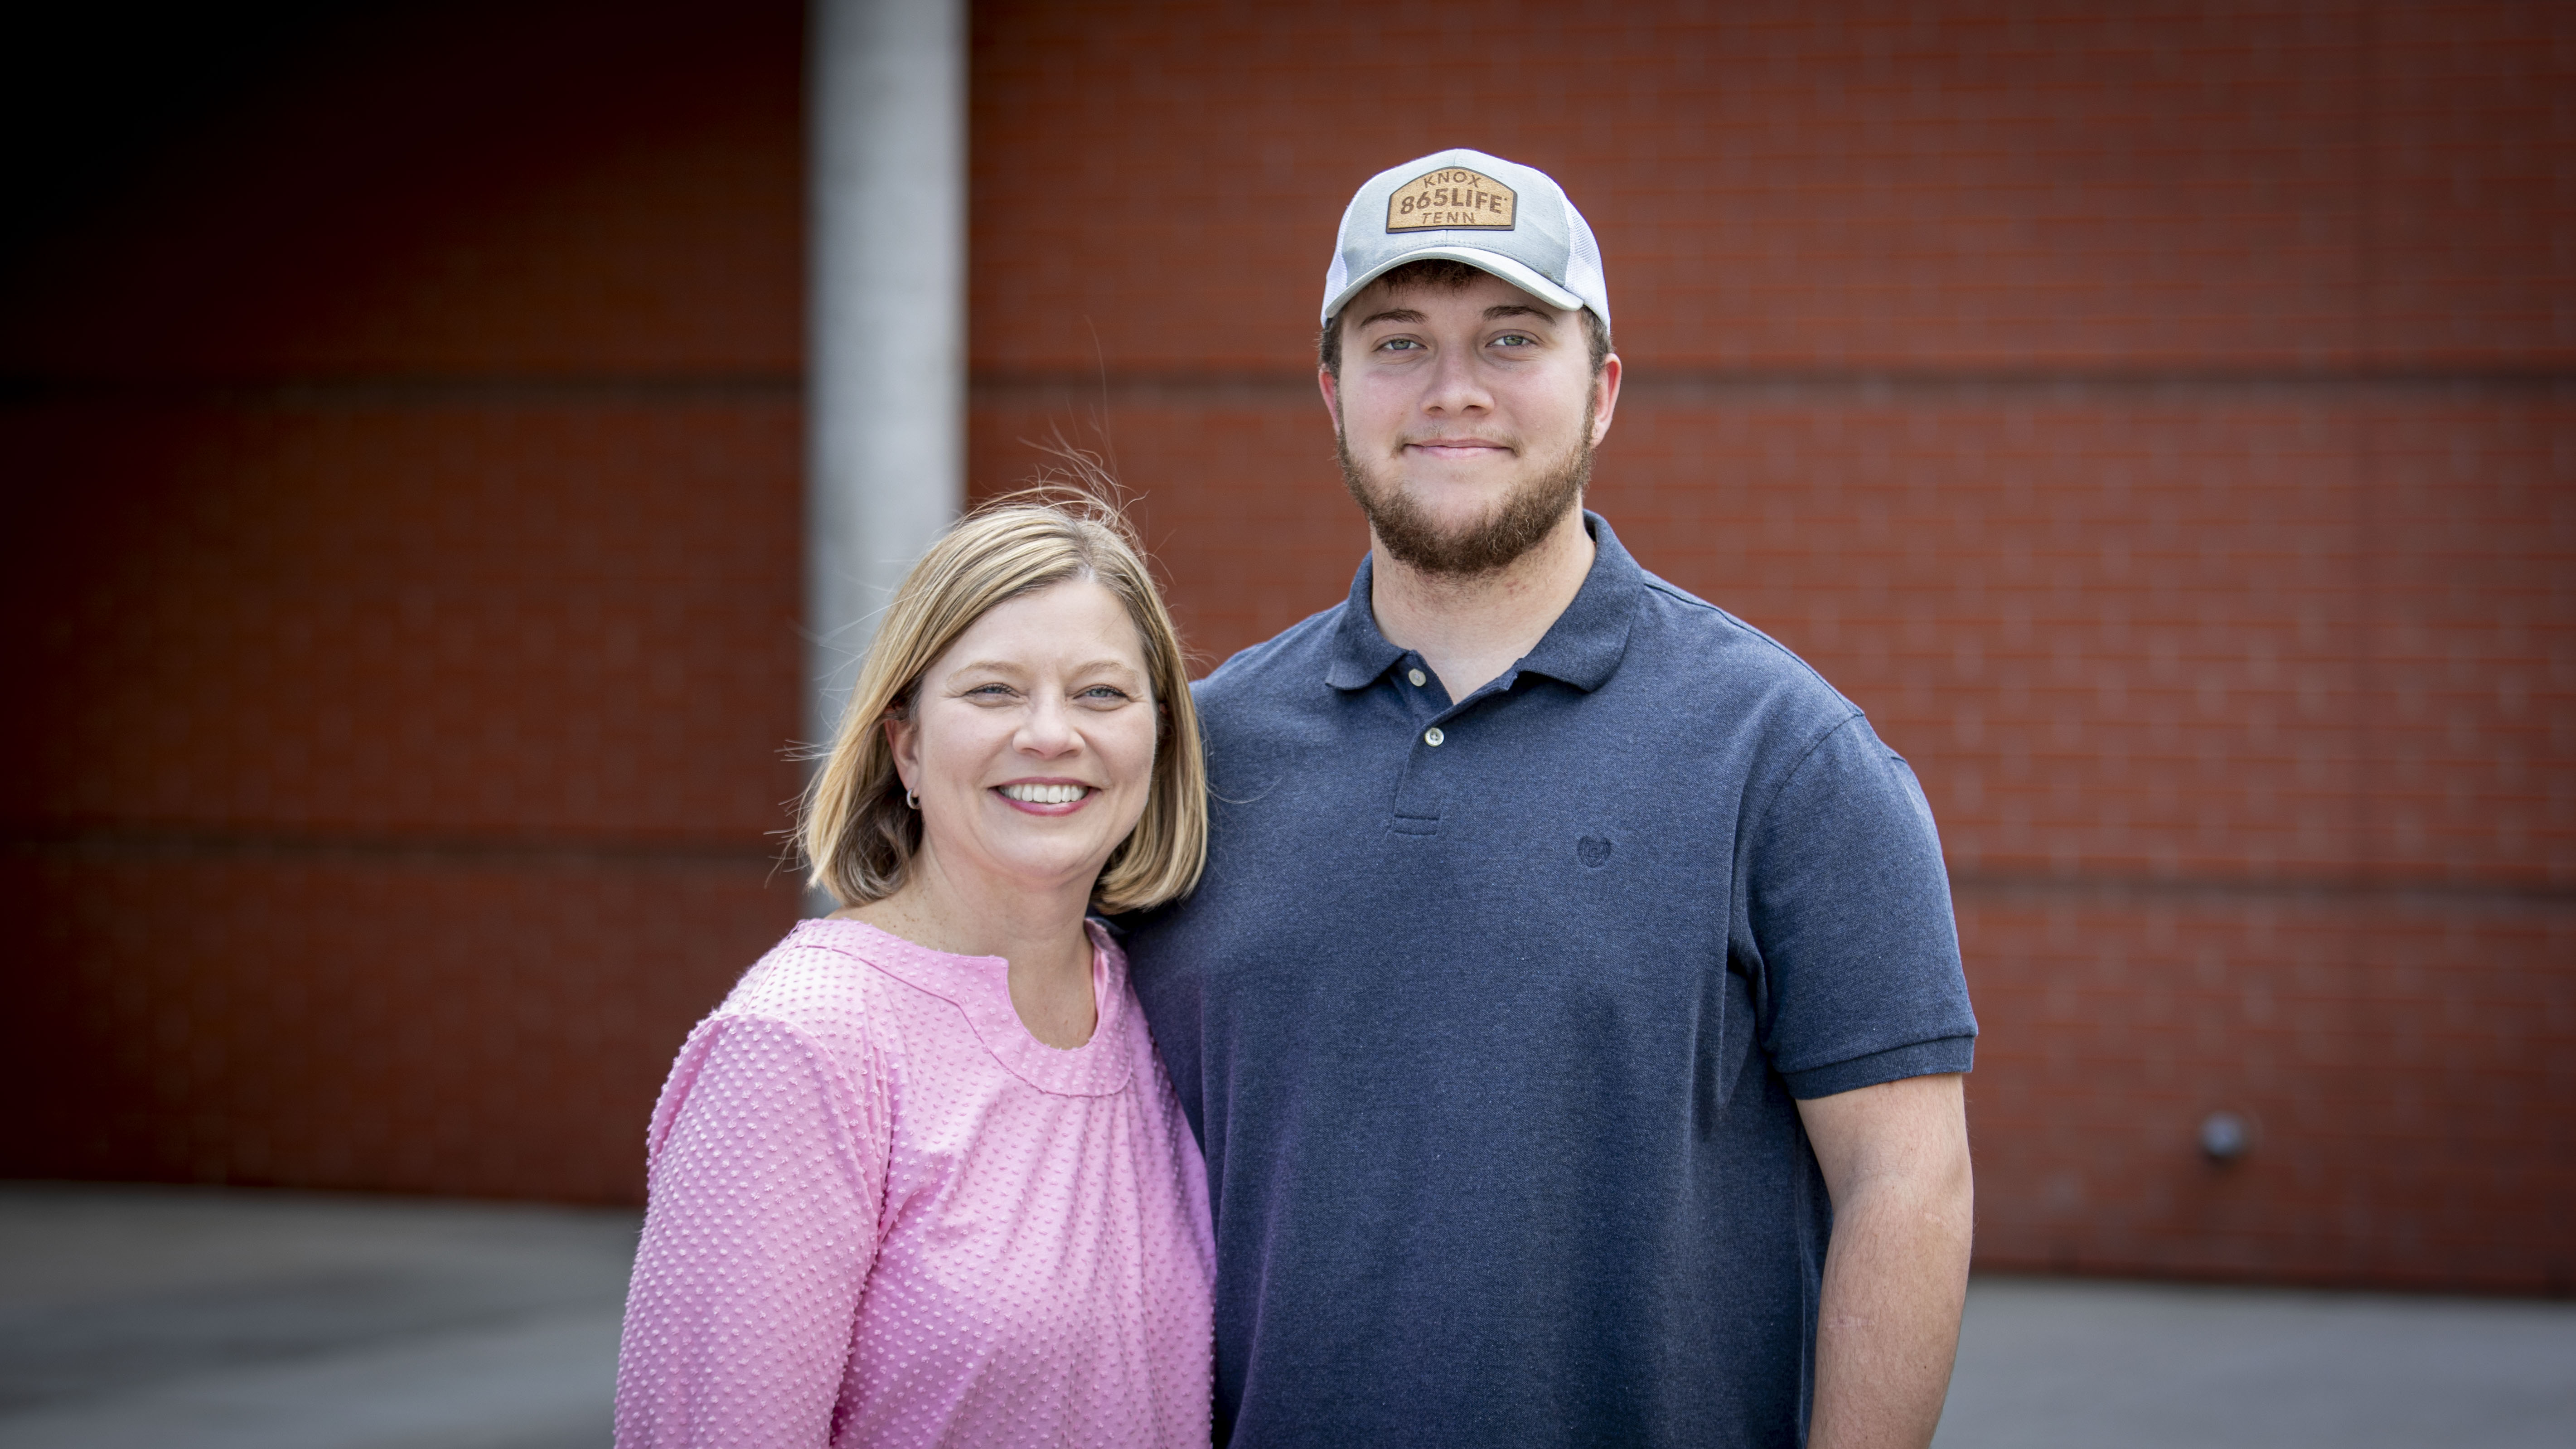 Y-12er mother and son, Patty and Bryson B. 